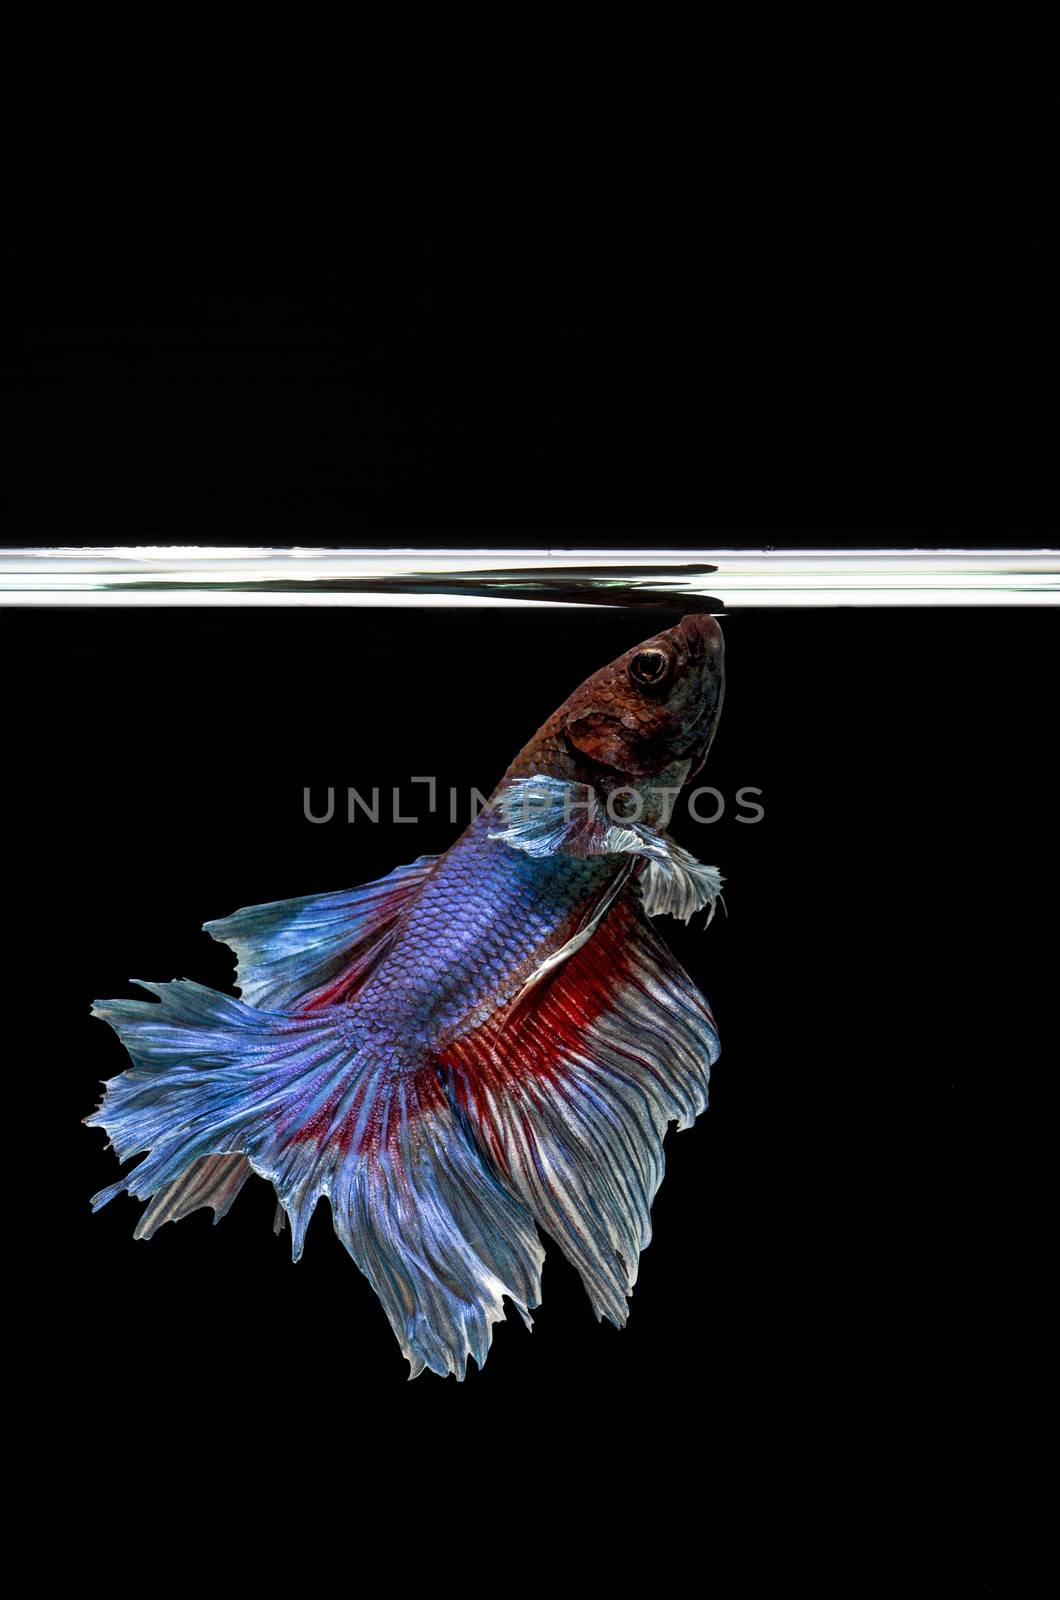 Fighting Fish : Clipping path included by 9george